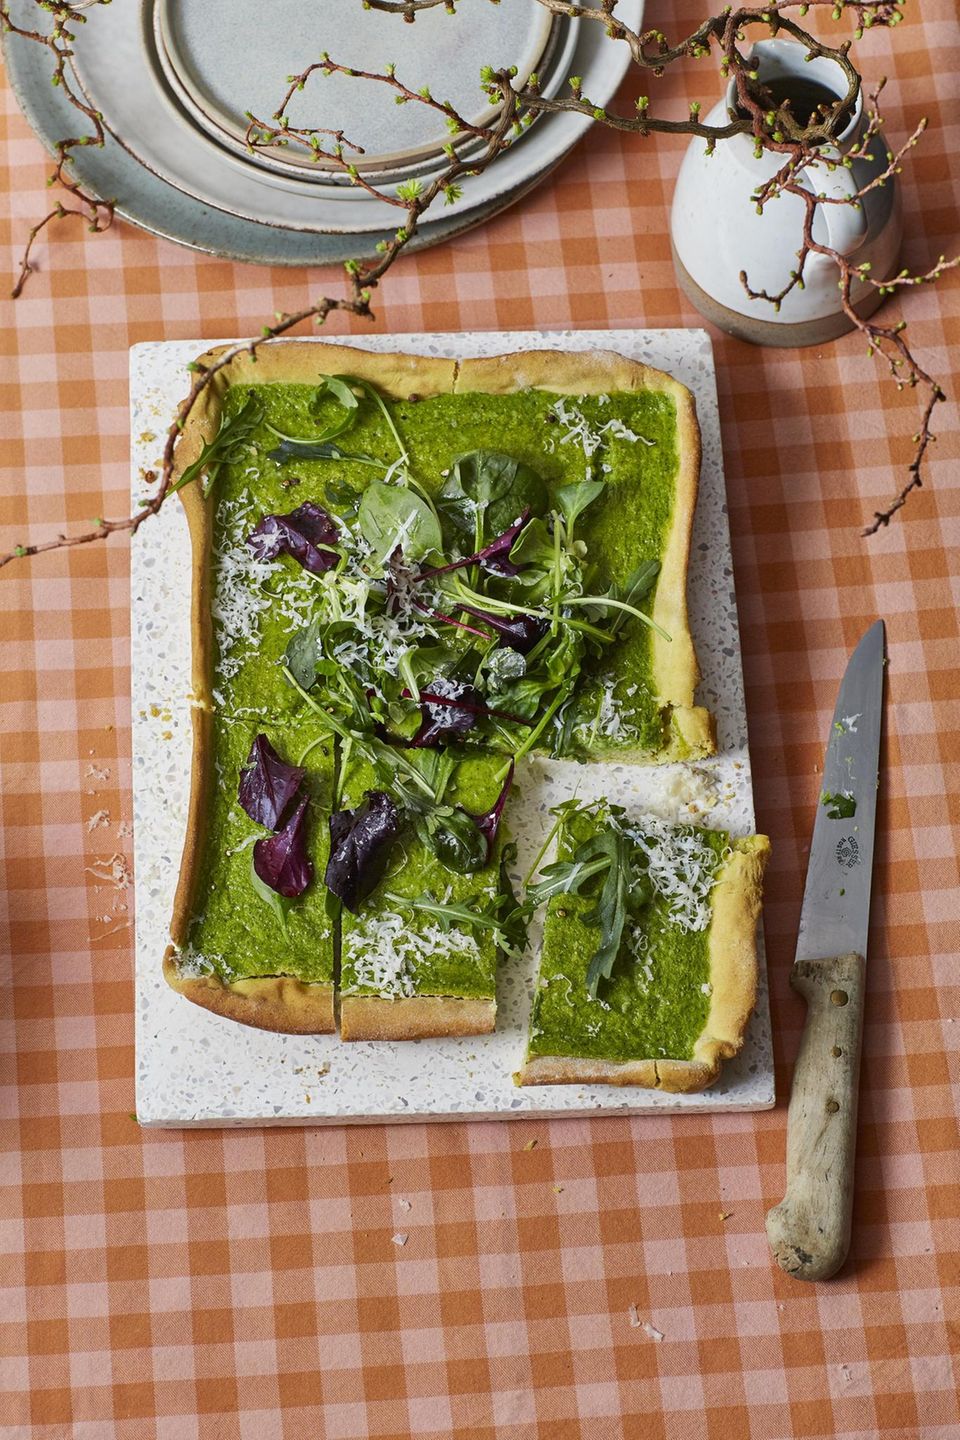 Super green: The quiche is the eye-catcher on the table (and tastes great!)